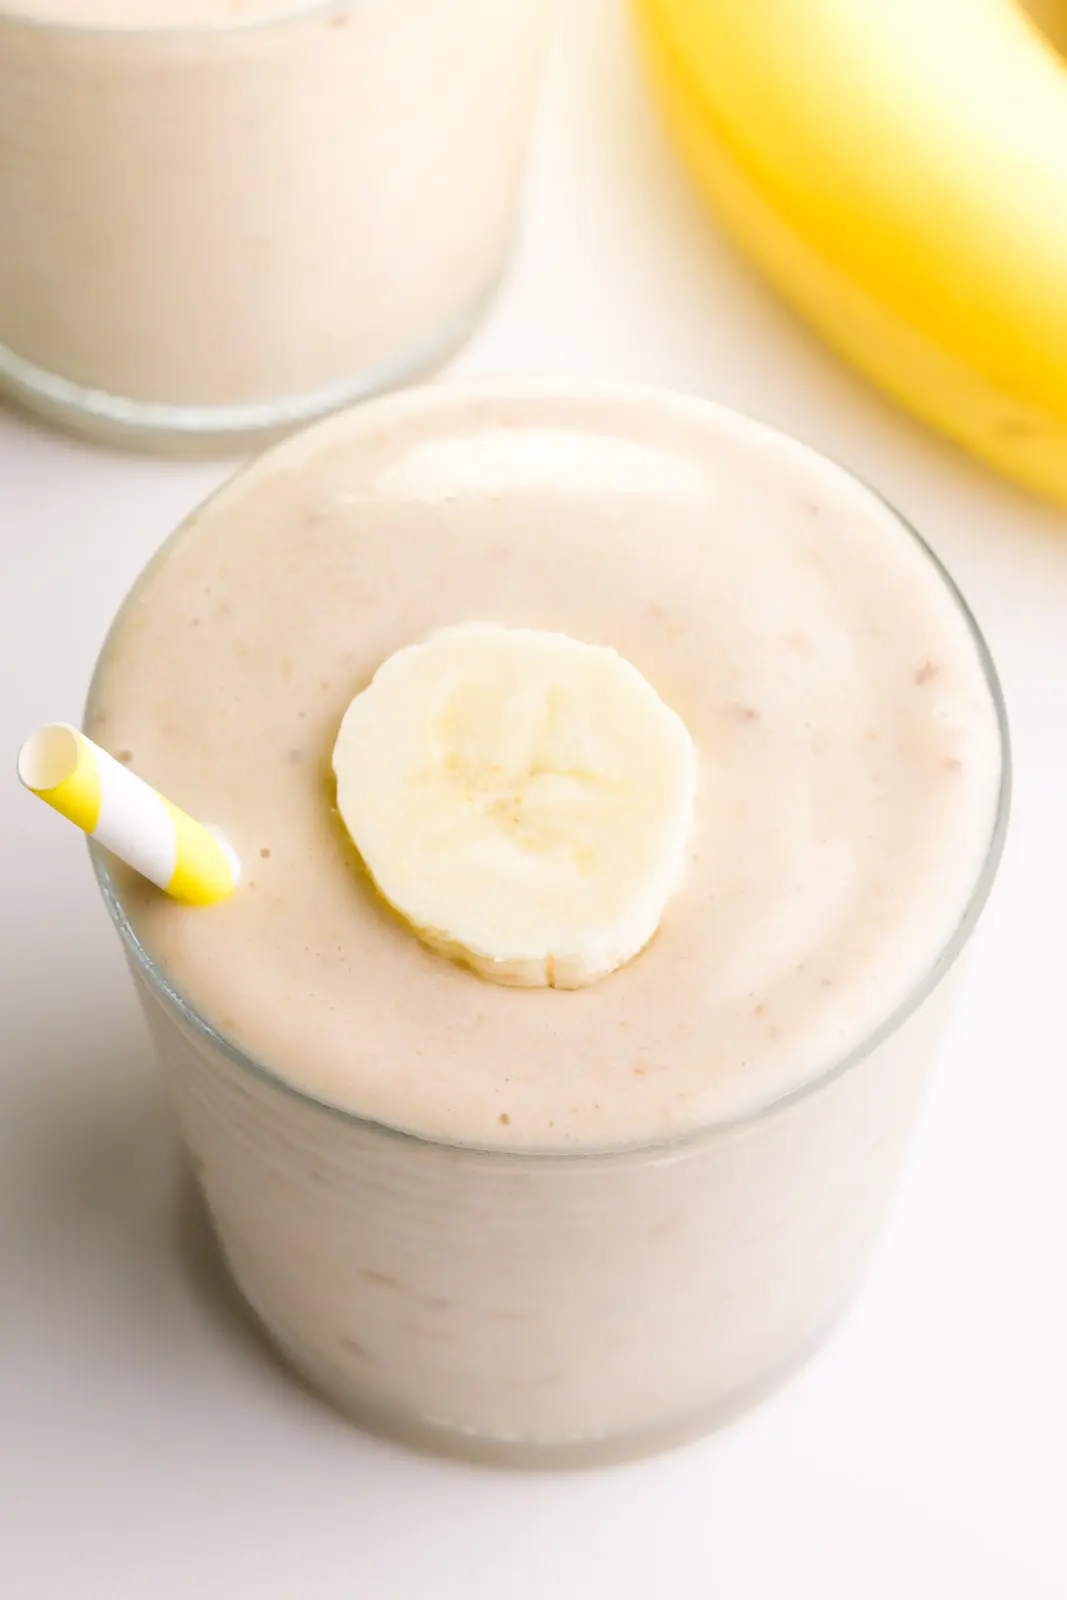 Looking down on a glass with banana smoothy. There's a banana slice on top and a yellow striped straw. There's another glass and a banana in the background.